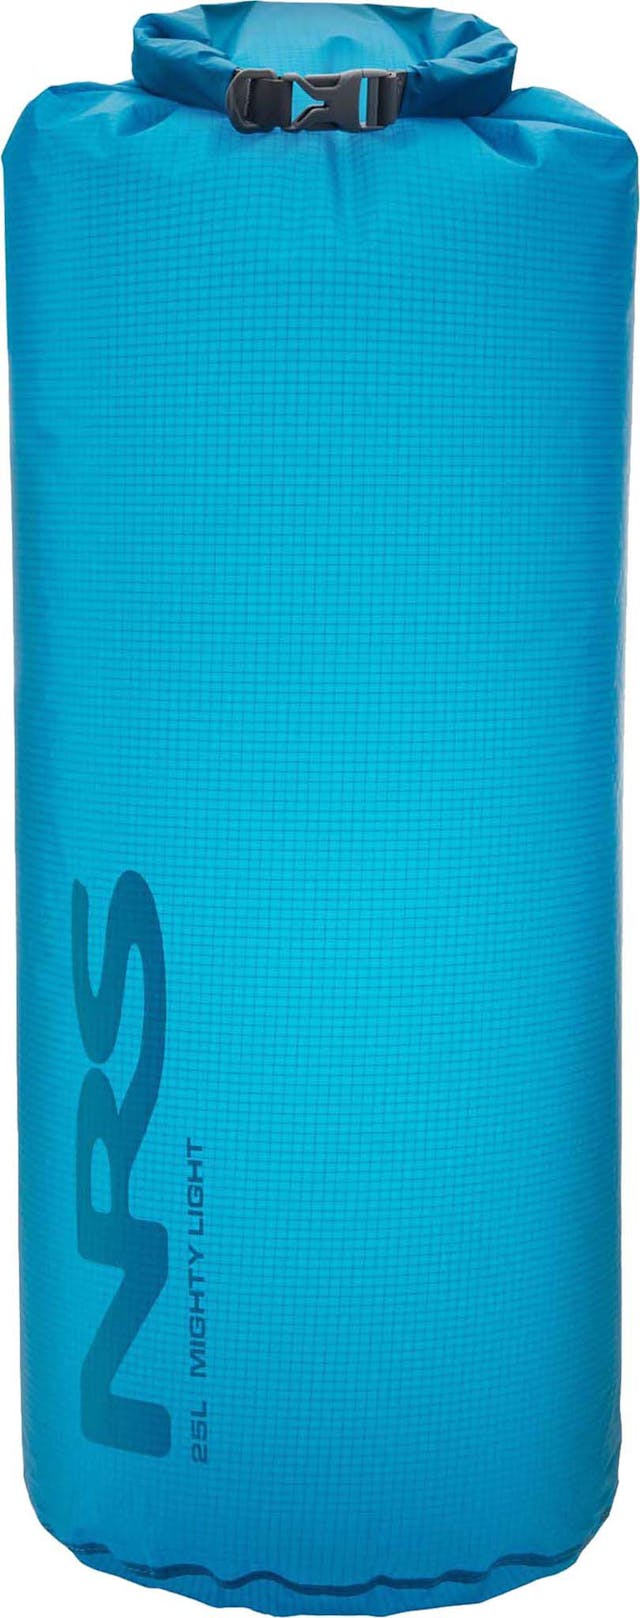 Product image for MightyLight Dry Sack 25L